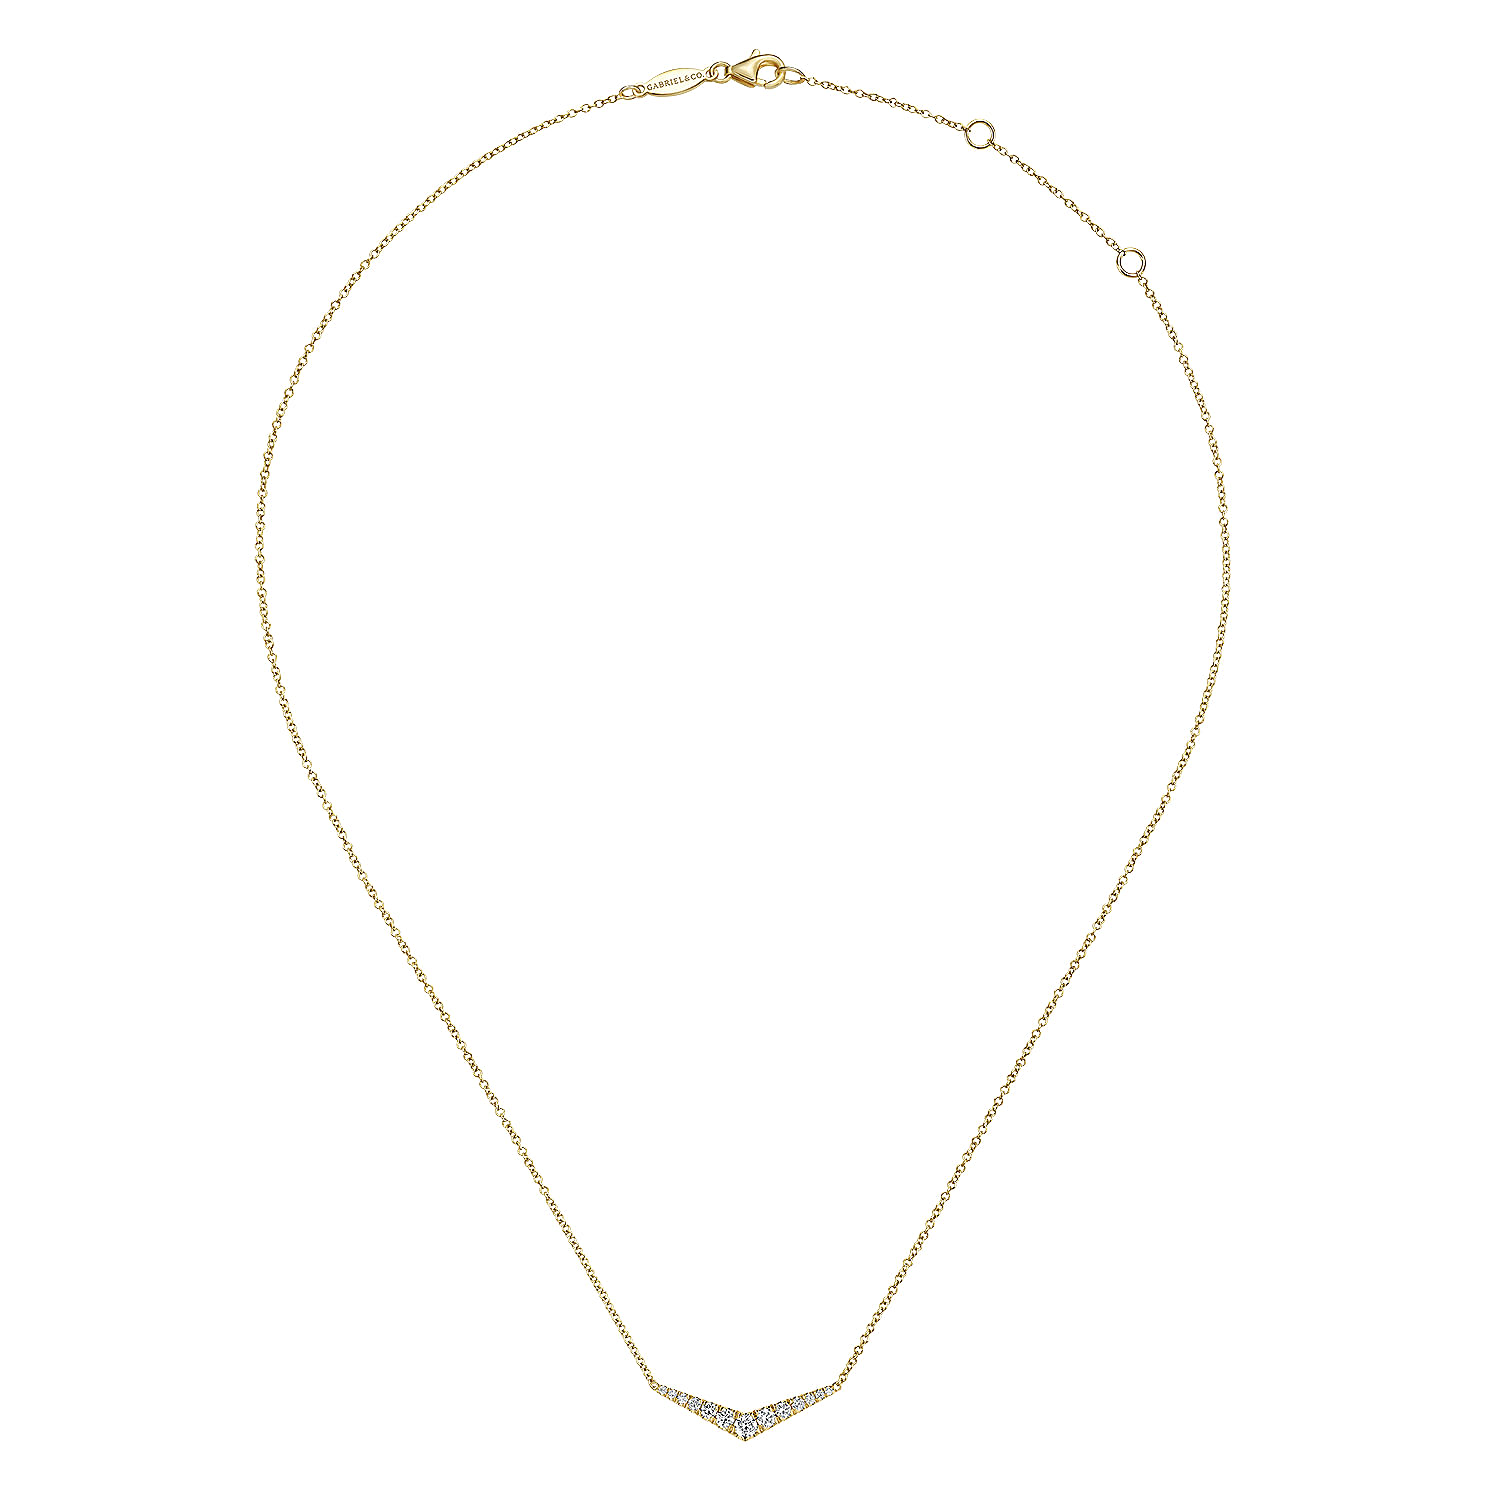 14K Yellow Gold Curved Diamond Bar Necklace